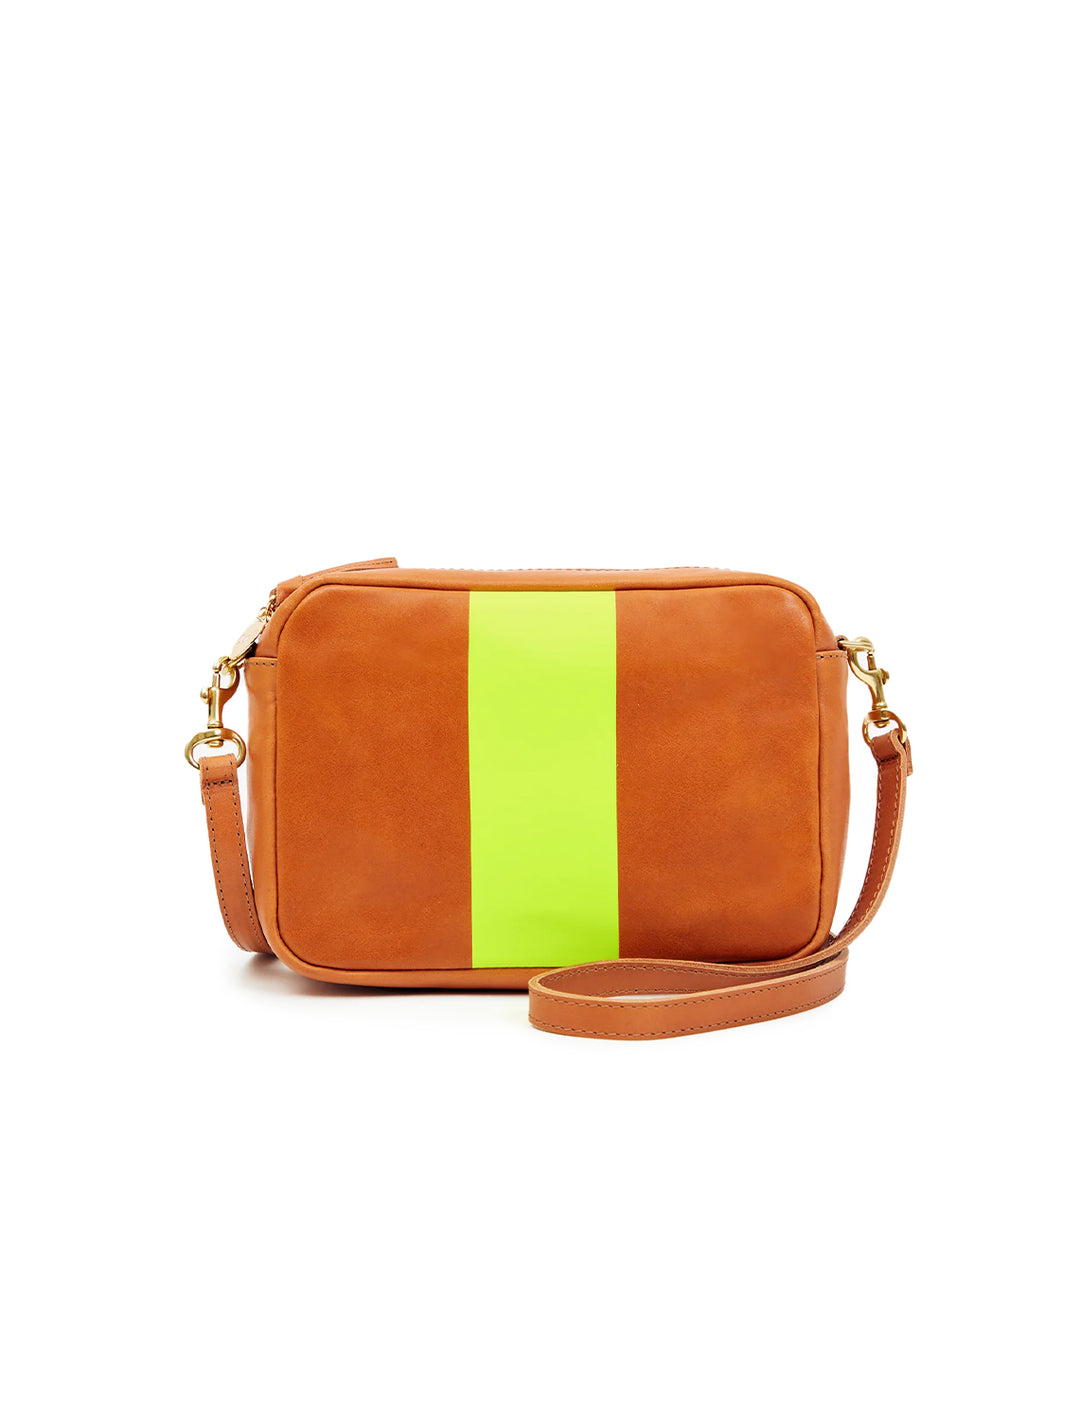 Front view of Clare V.'s midi sac in tan nepetto leather and neon stripe.